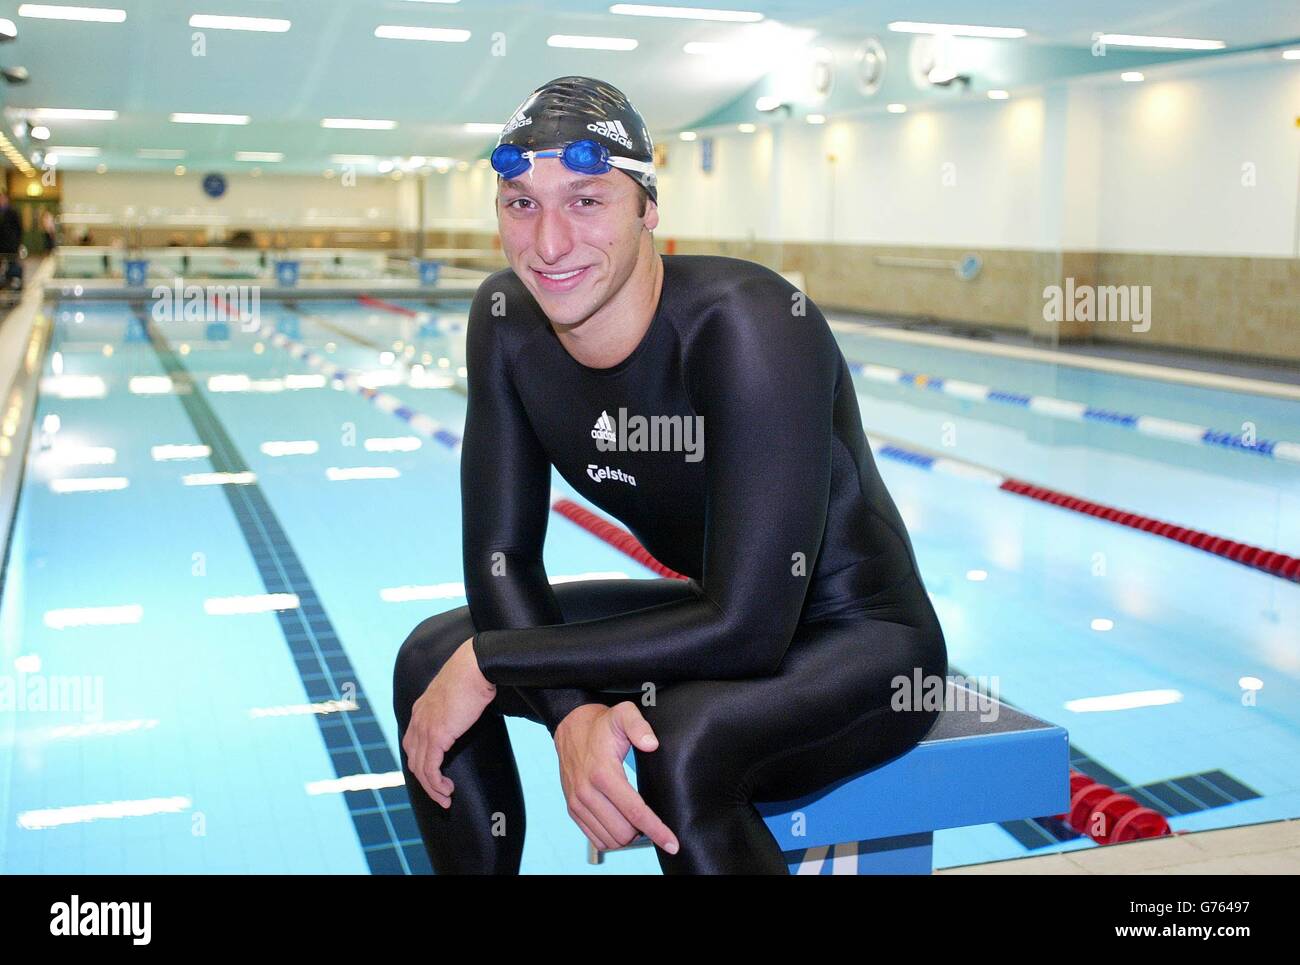 Australian Olympic gold medal winning swimmer Ian Thorpe takes a break from the training pool at Manchester Aquatics Centre - a venue for the Commonwealth Games. Stock Photo